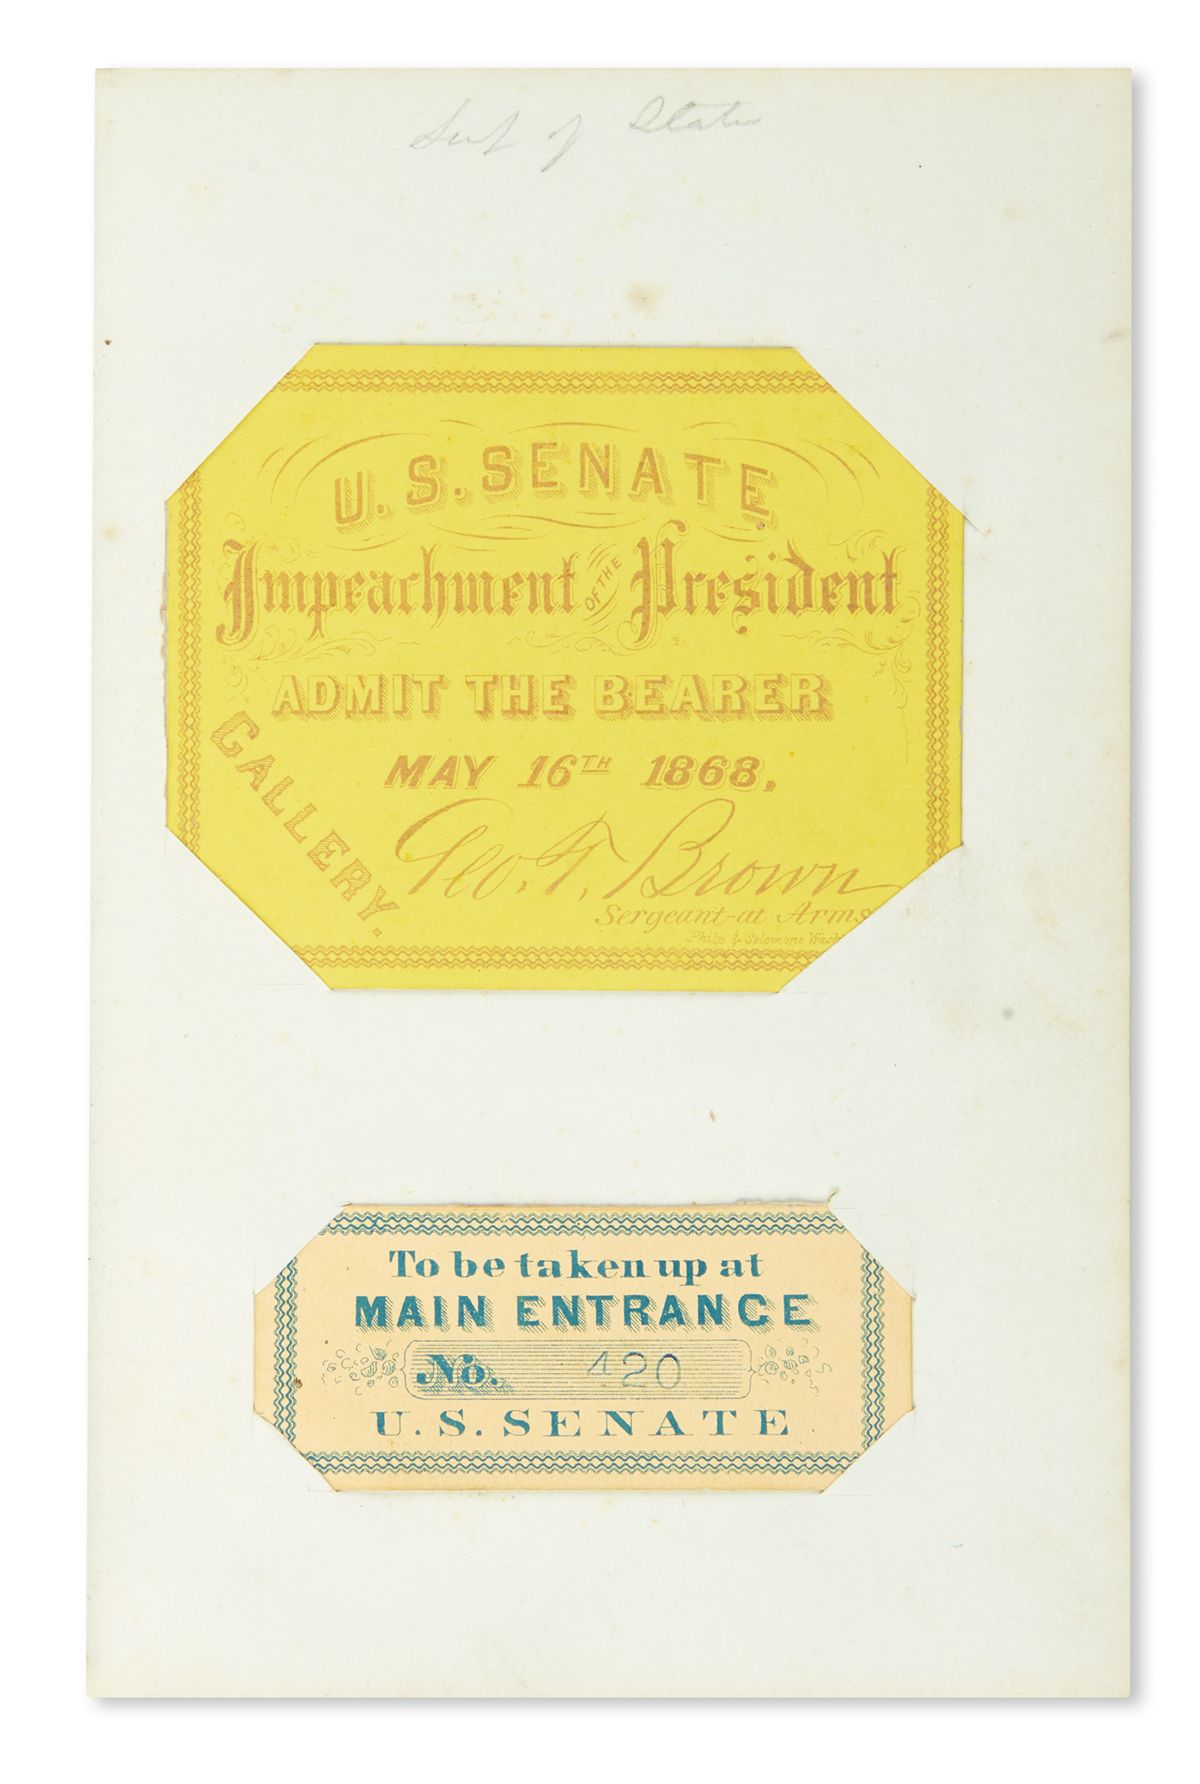 (CIVIL WAR--POLITICIANS--ALBUM.) Autograph album issued by Lippincott containing over 30 Signatures by American politicians of the Civi